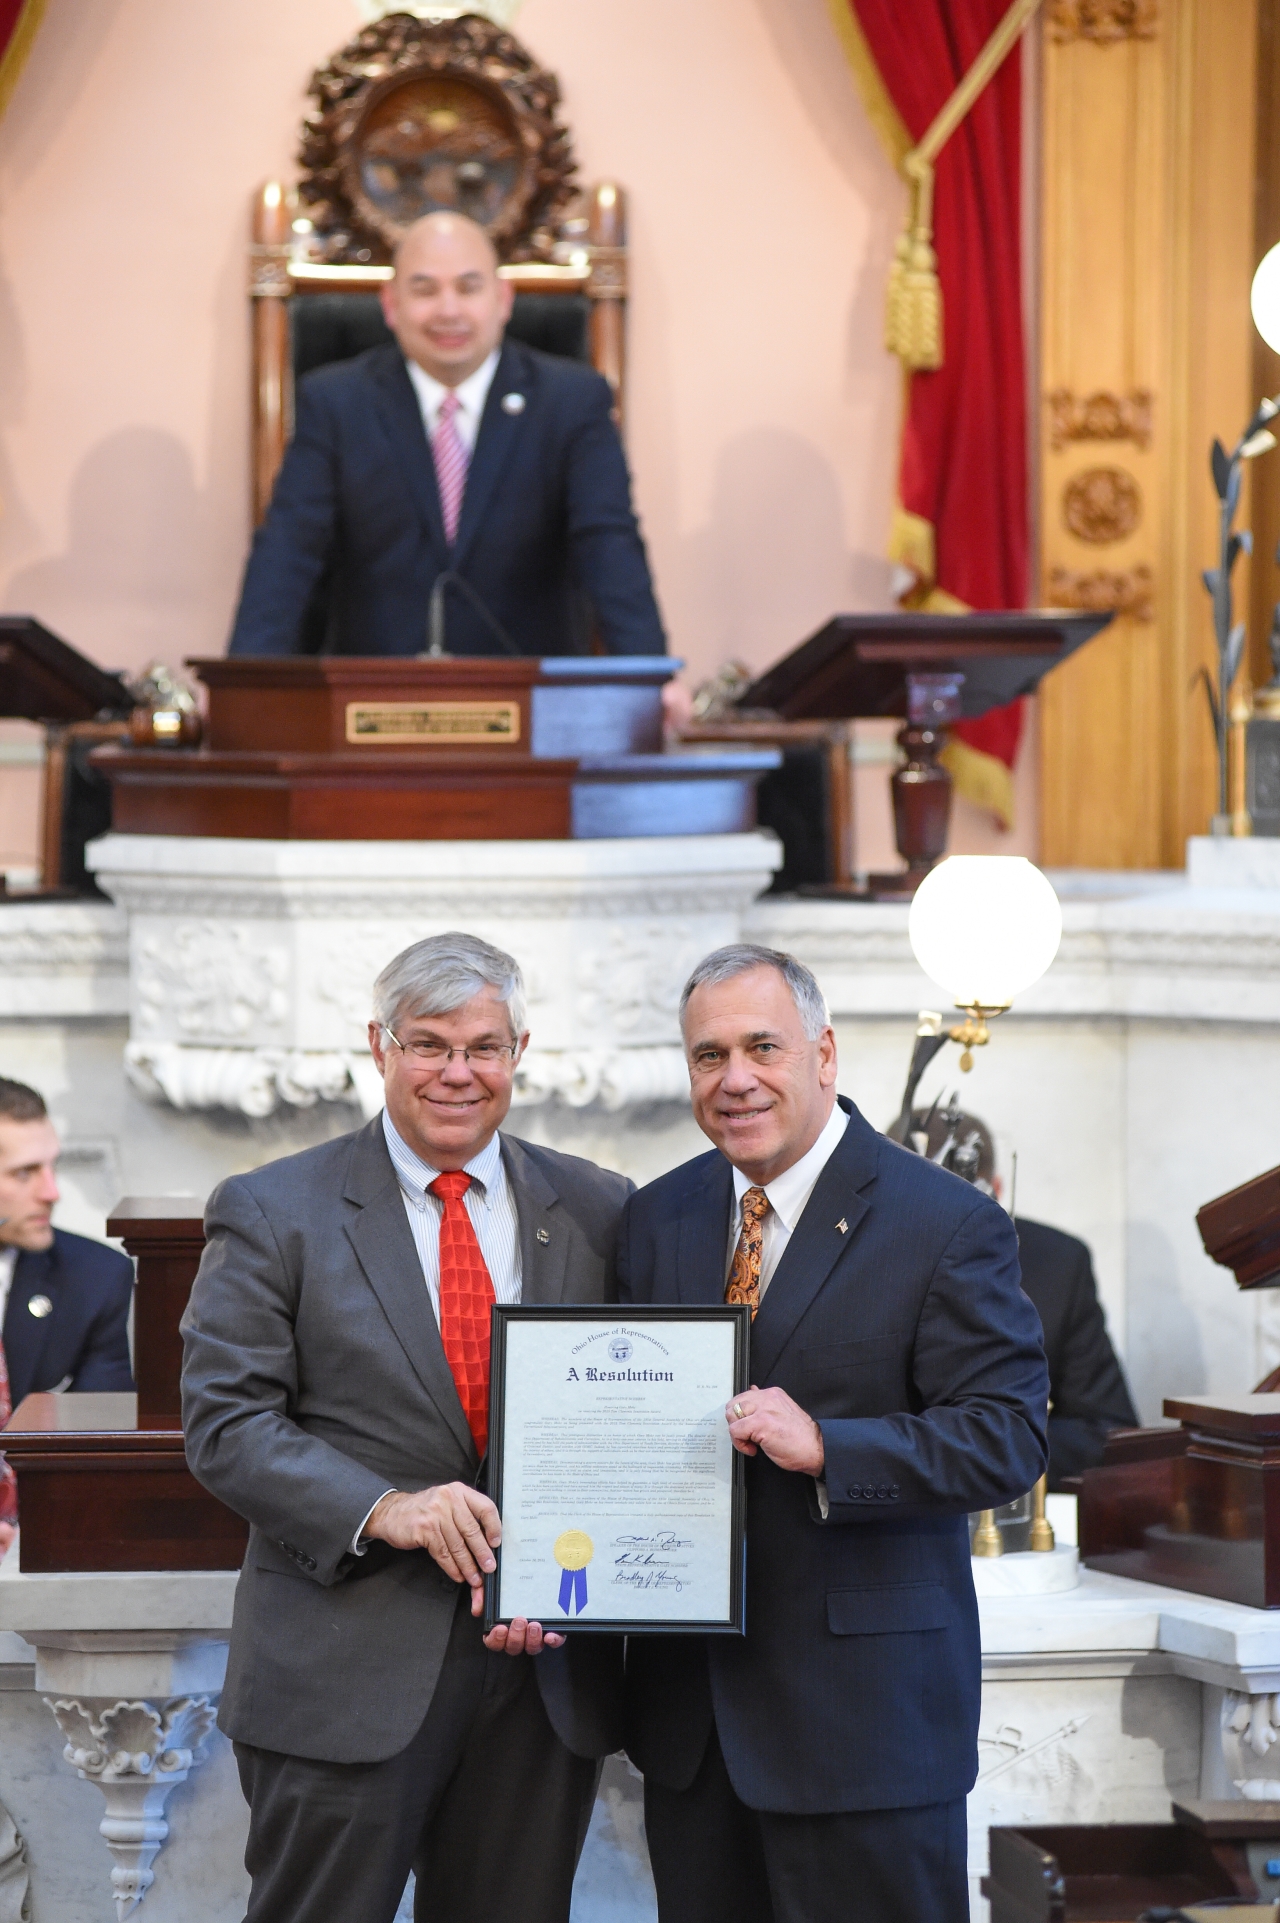 State Rep. Scherer Honors Mohr for Receiving National Corrections Award